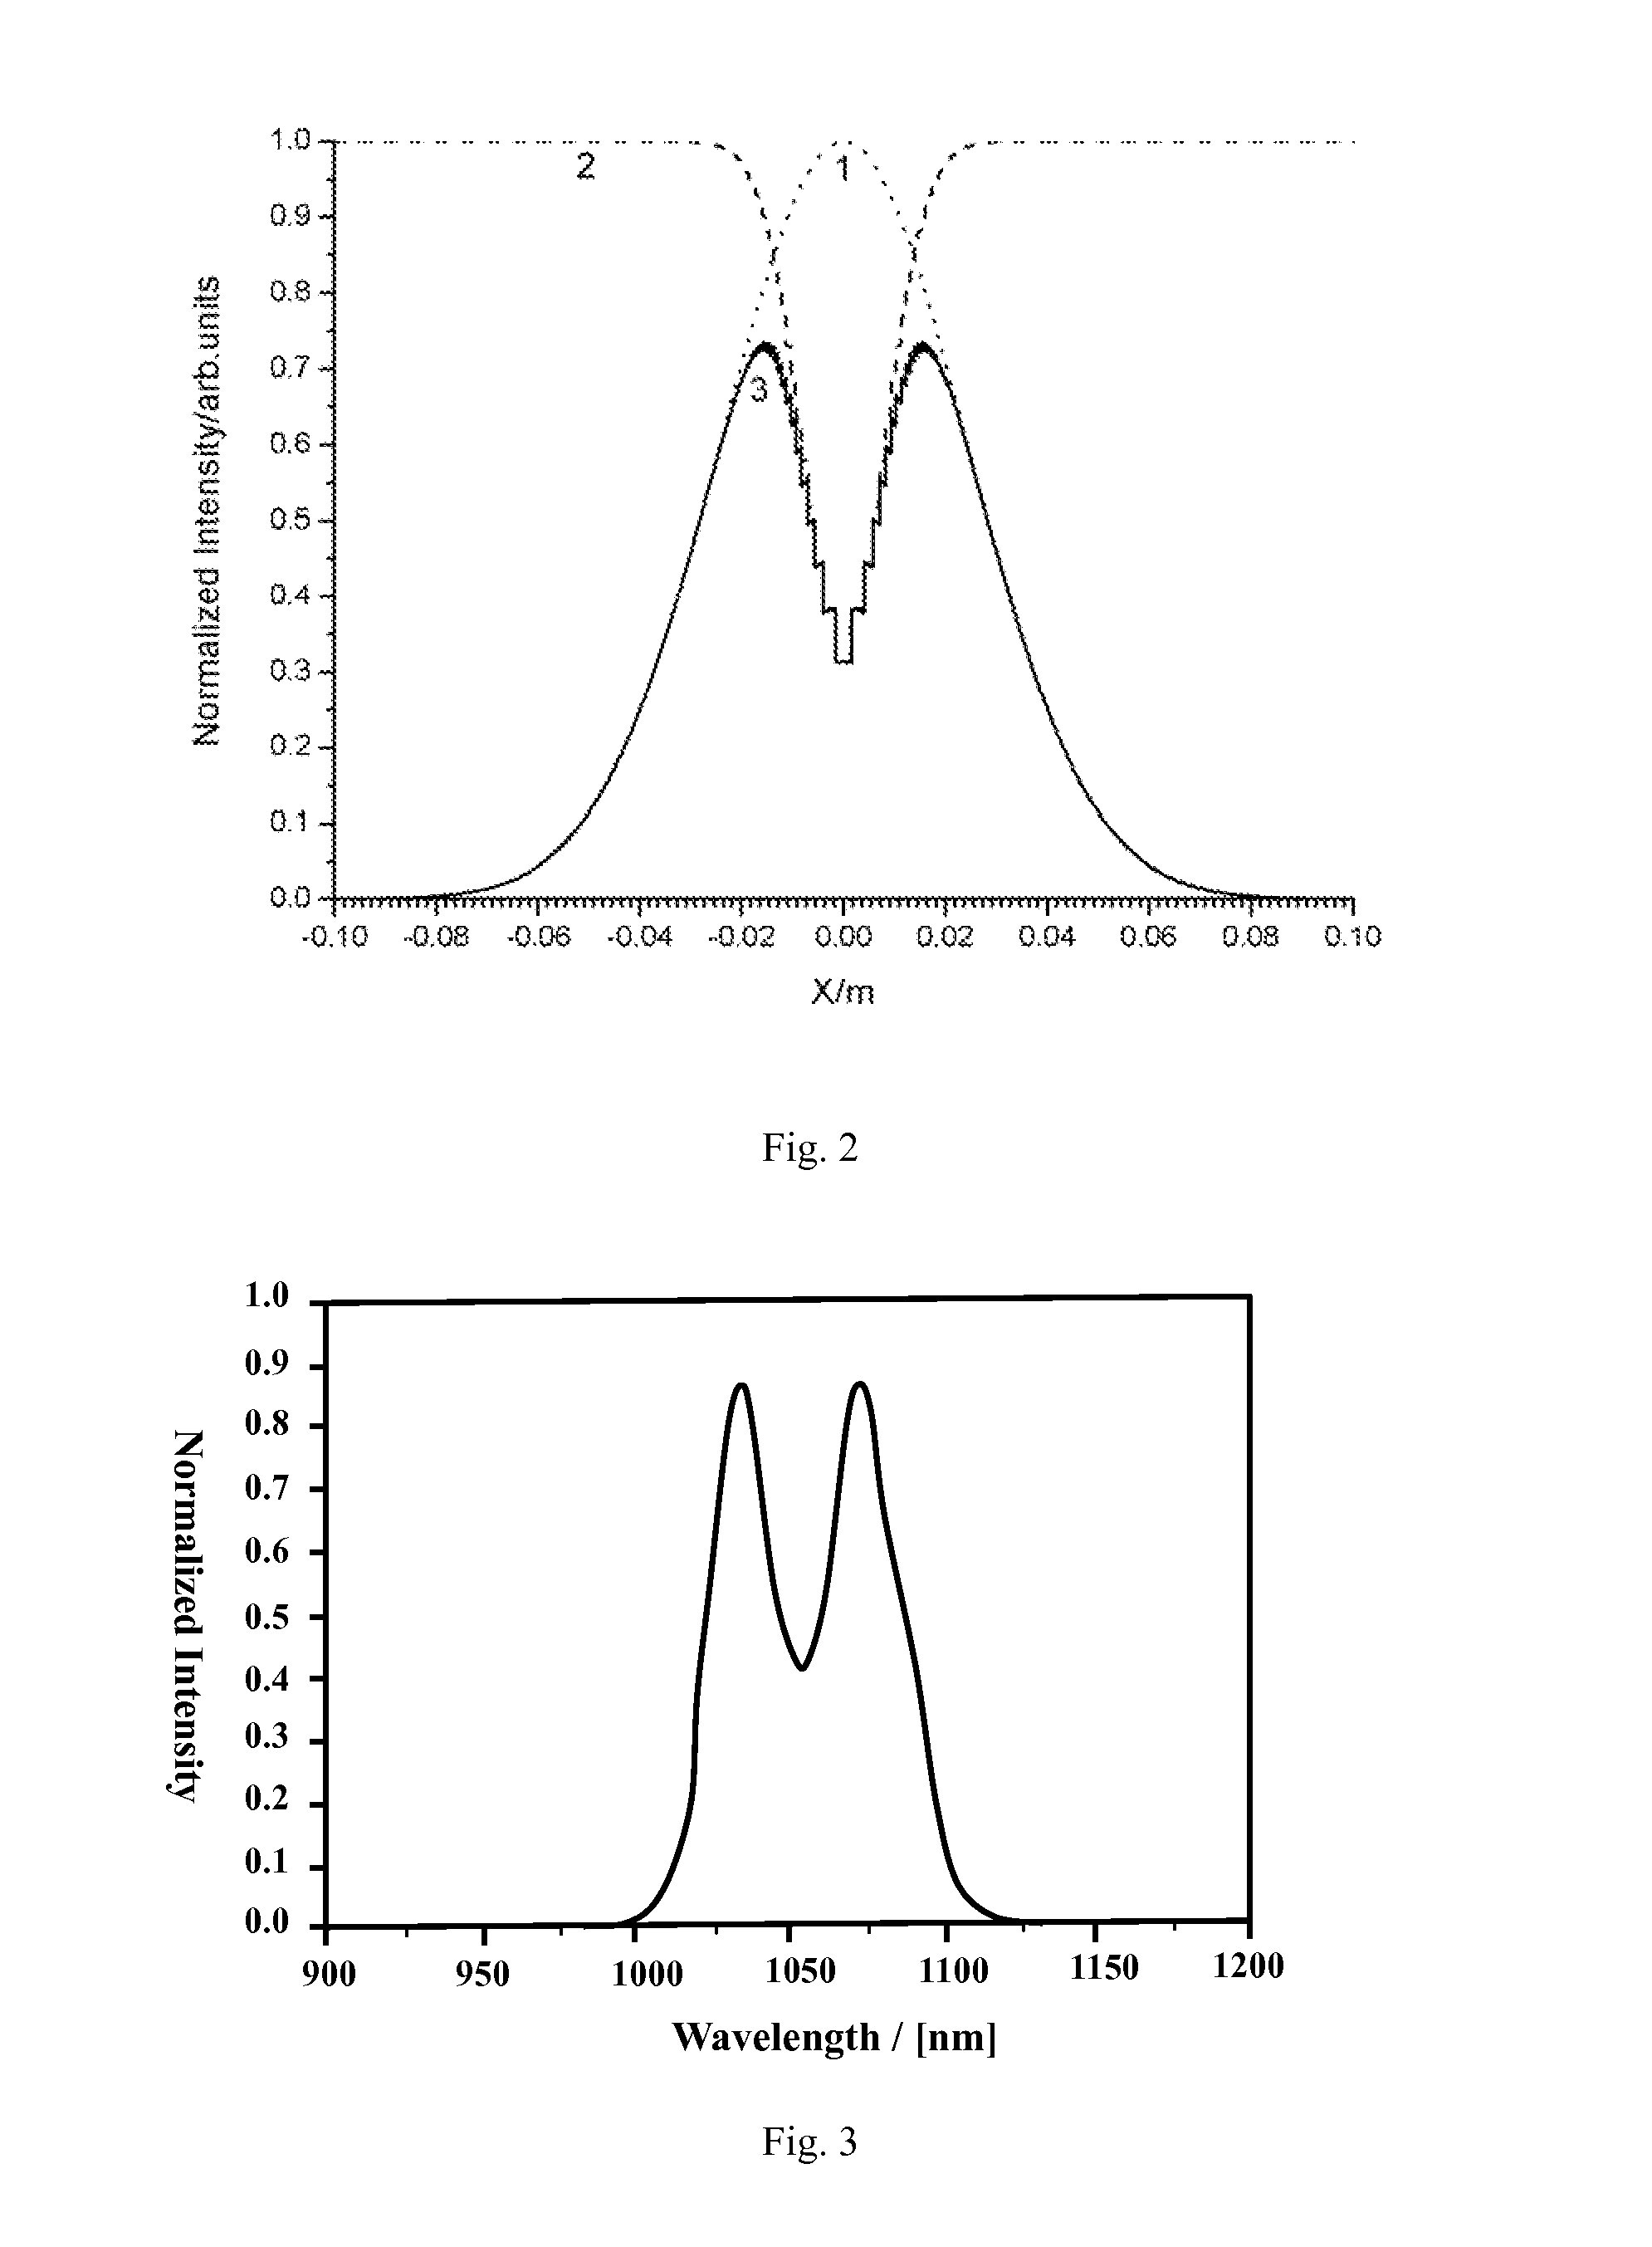 Spectra shaping device for chirped pulse amplification